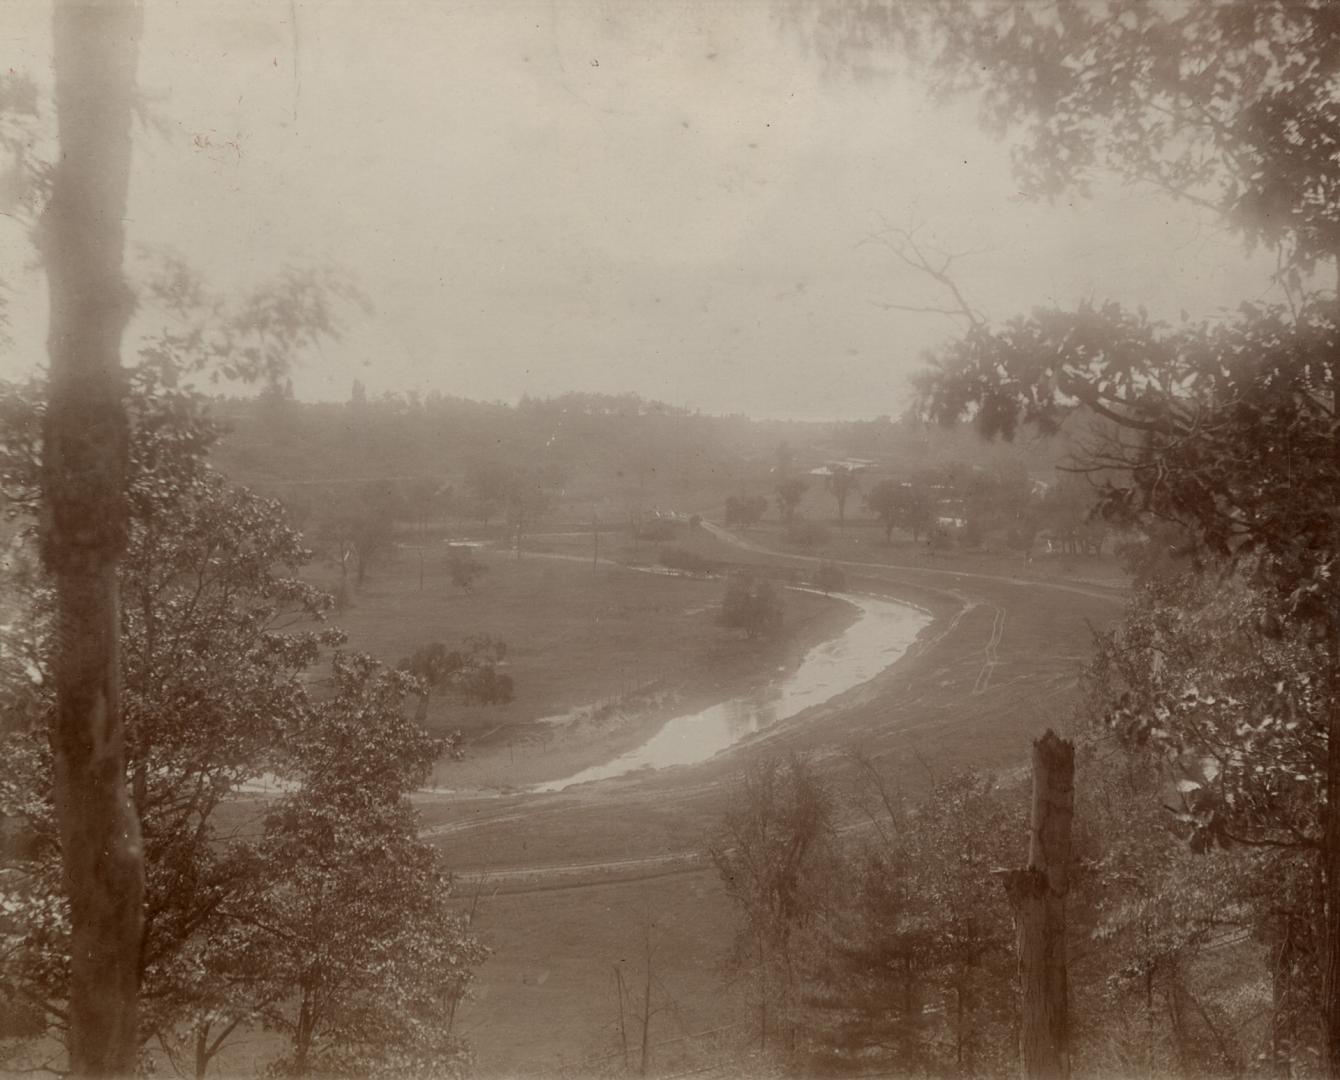 Image shows a river view with some trees on both sides.